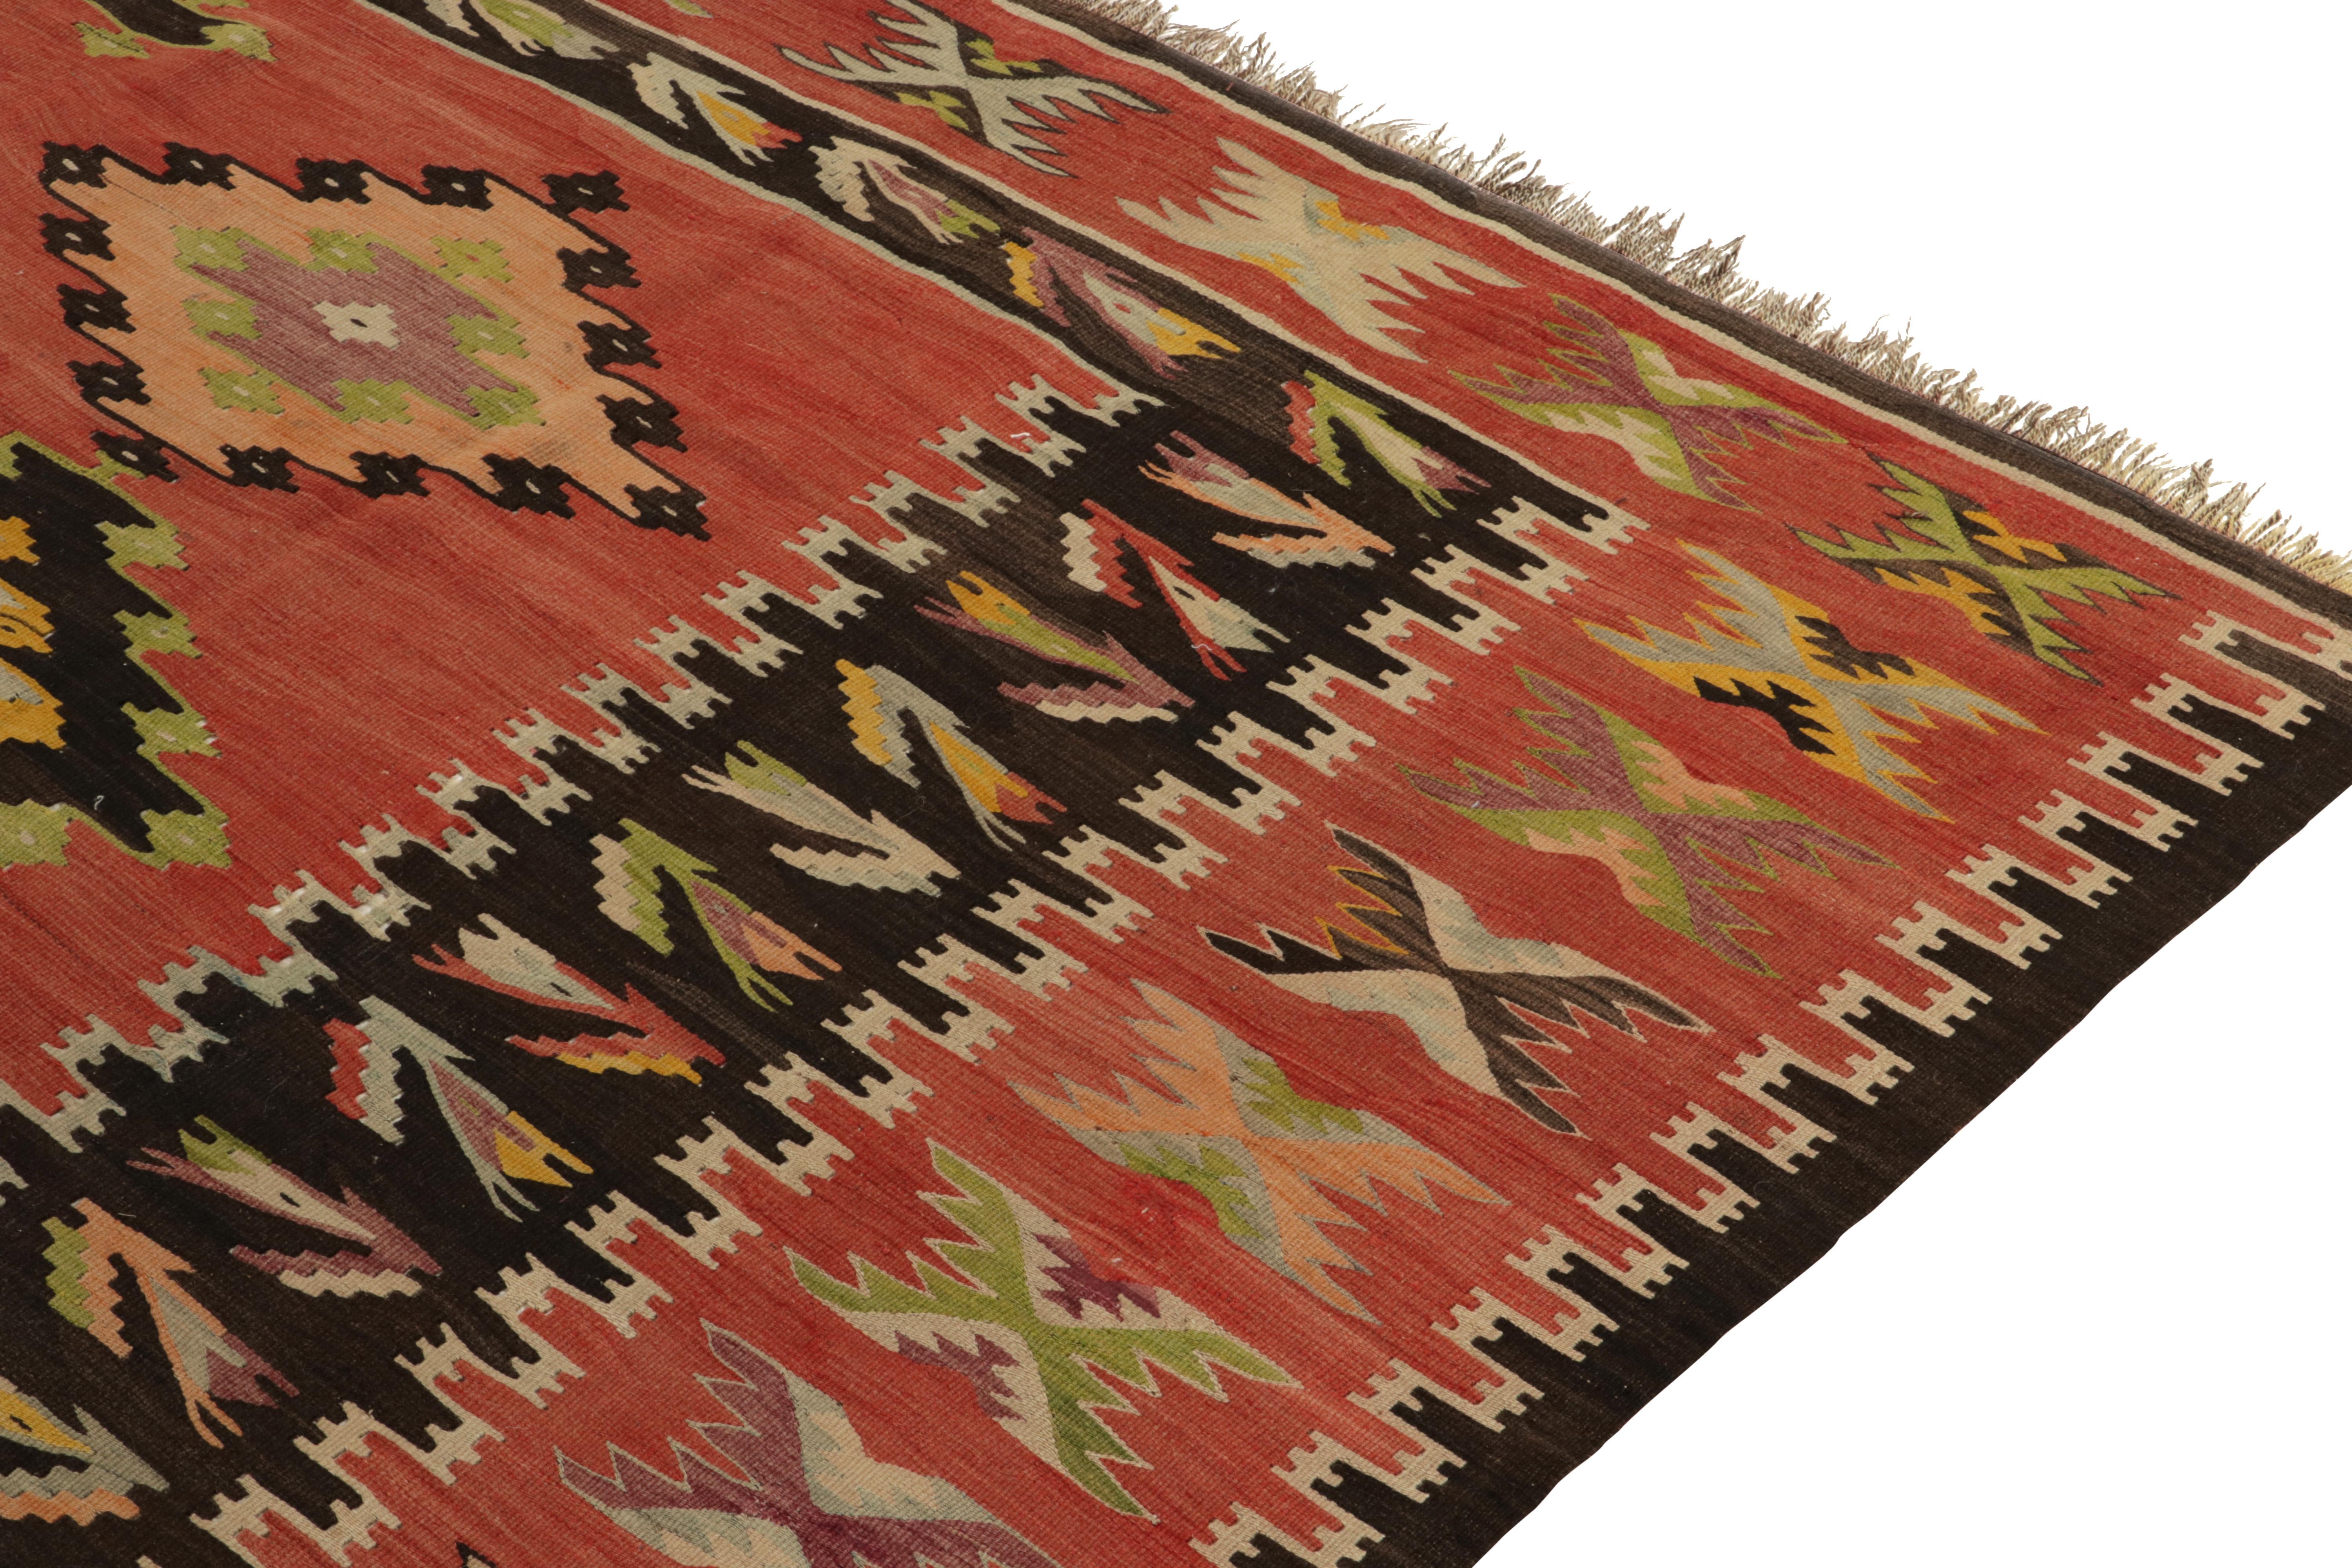 Handwoven Vintage Kilim in Red, Brown and Green Medallion Pattern by Rug & Kilim In Good Condition For Sale In Long Island City, NY